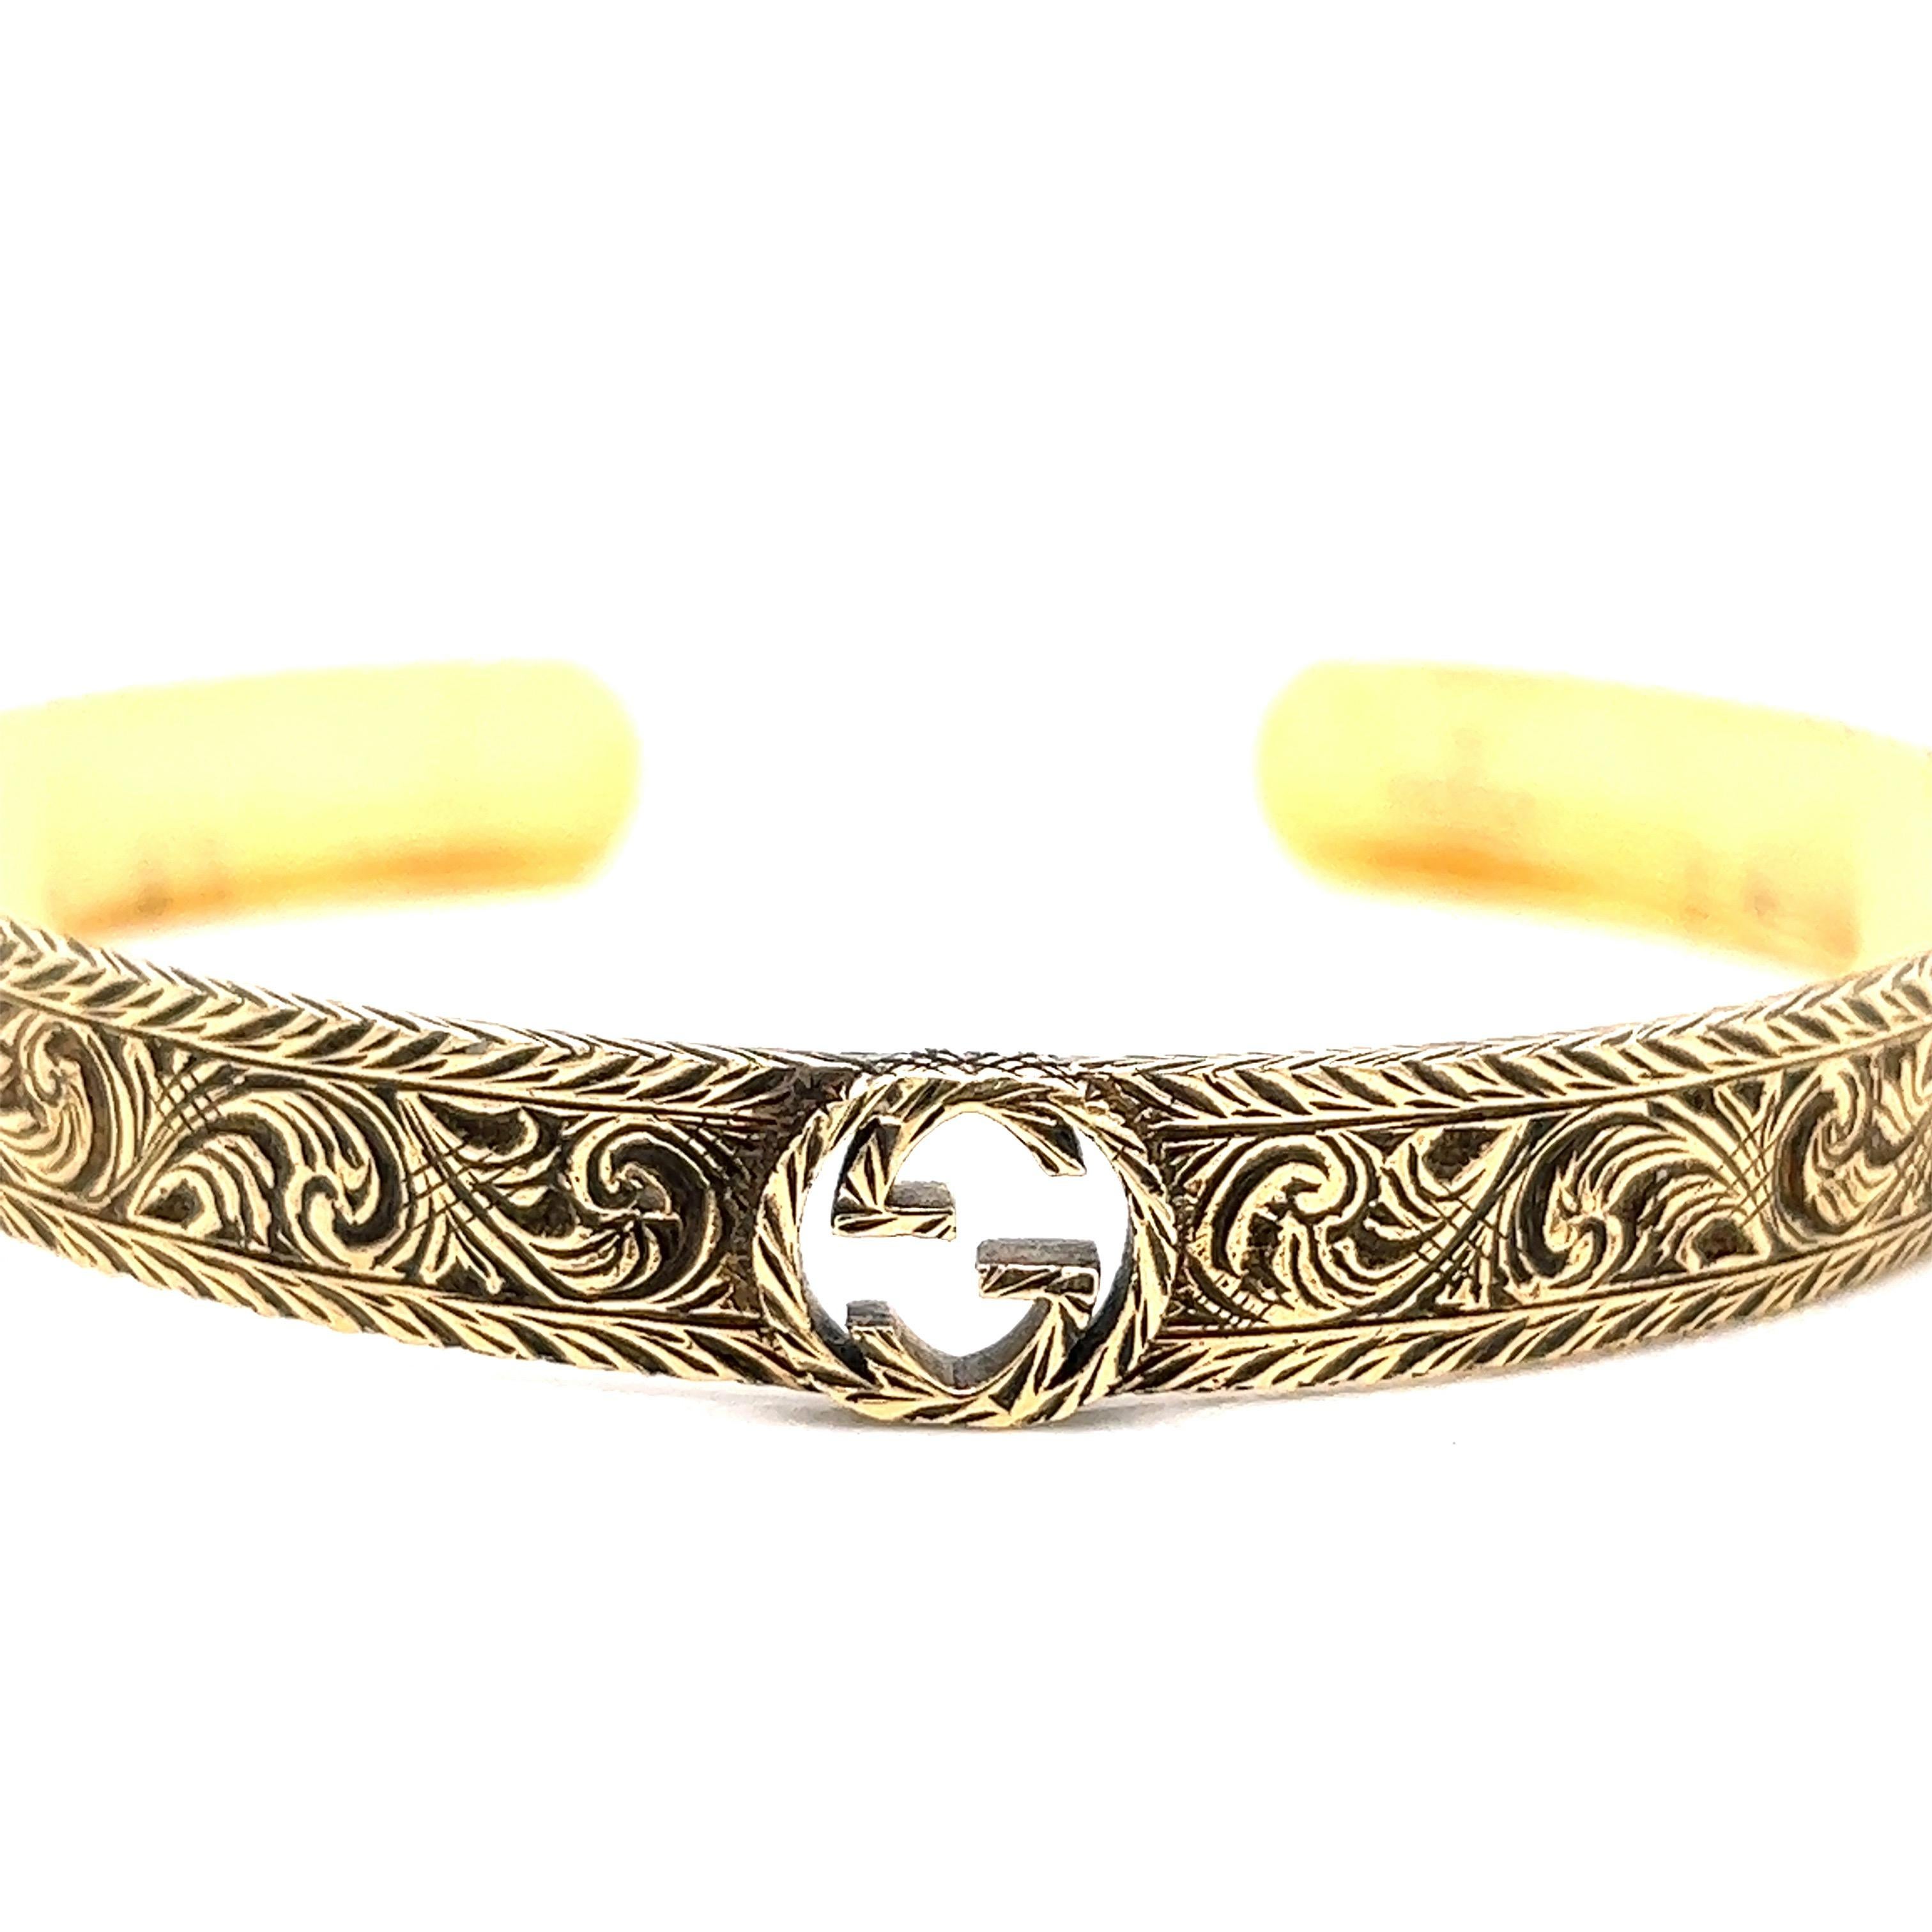 Gucci 18 karat yellow gold bangle bracelet

Intricate swirl designs on the outer band; marked Gucci, made in Italy, 18, Au750

Inner circumference: 6.63 inches; Band width: 0.8 mm
Total weight: 20.4 grams